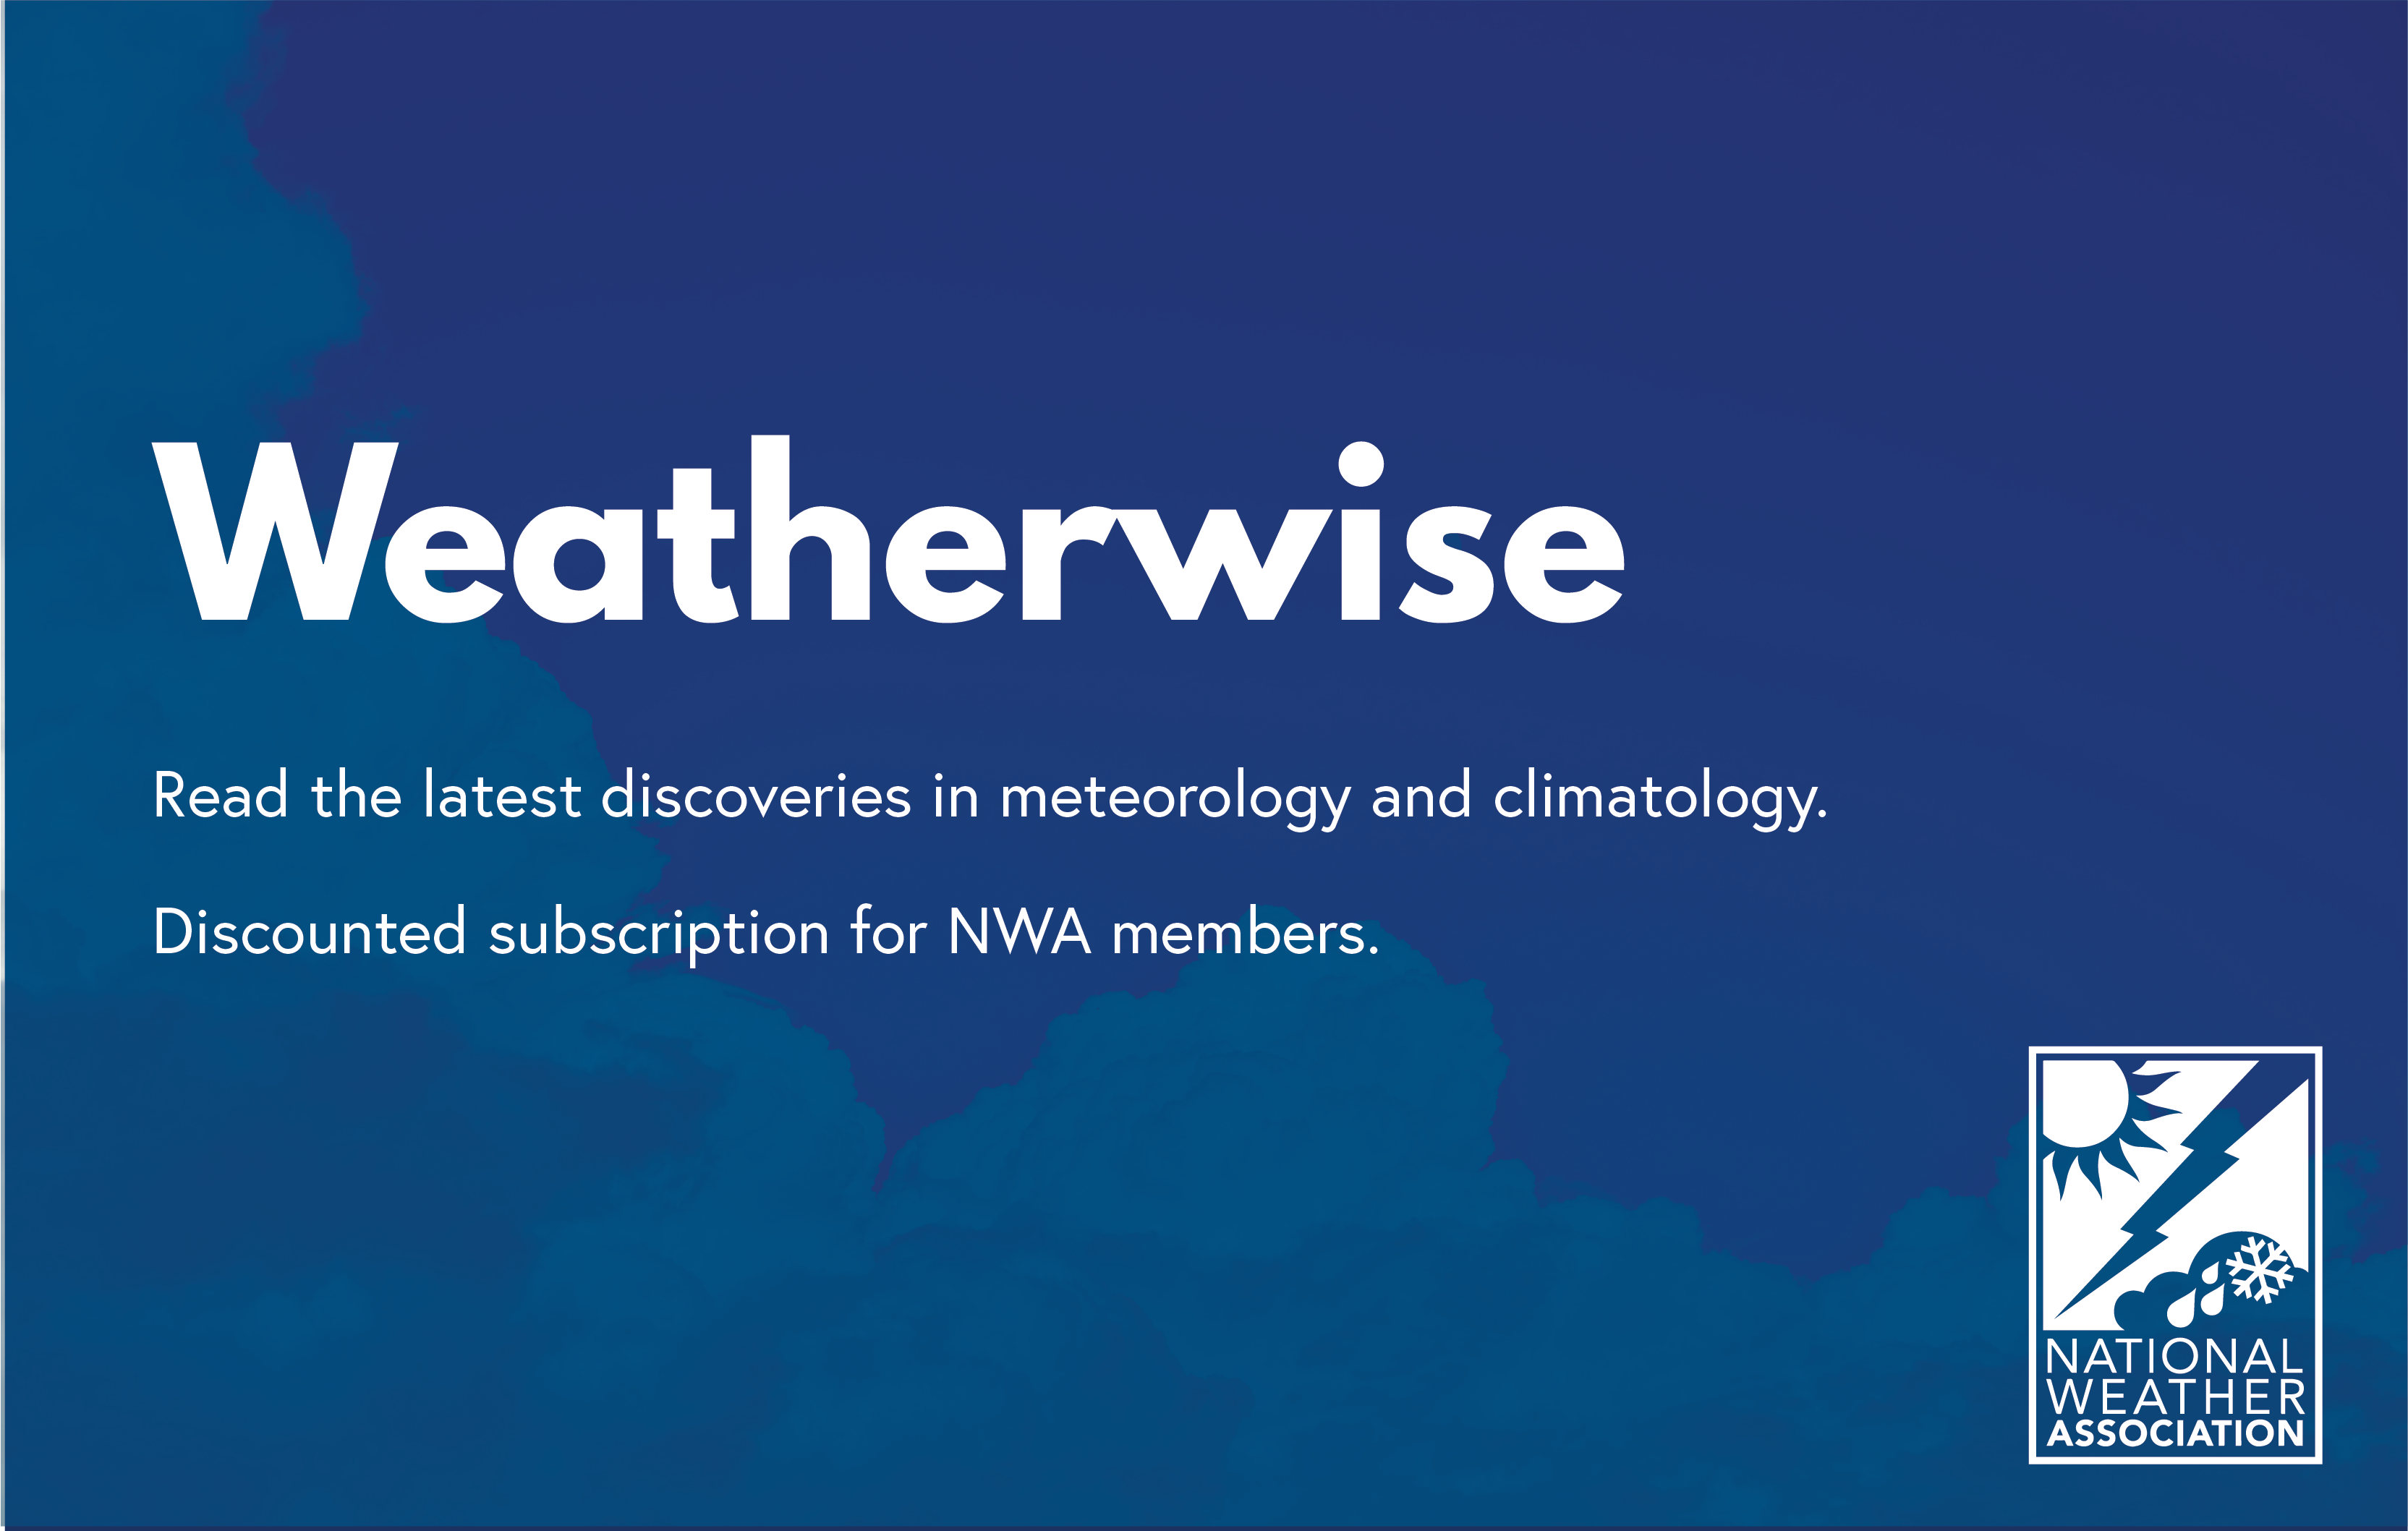 Read the latest discoveries in meteorology and climatology. Discounted subscription for NWA members.